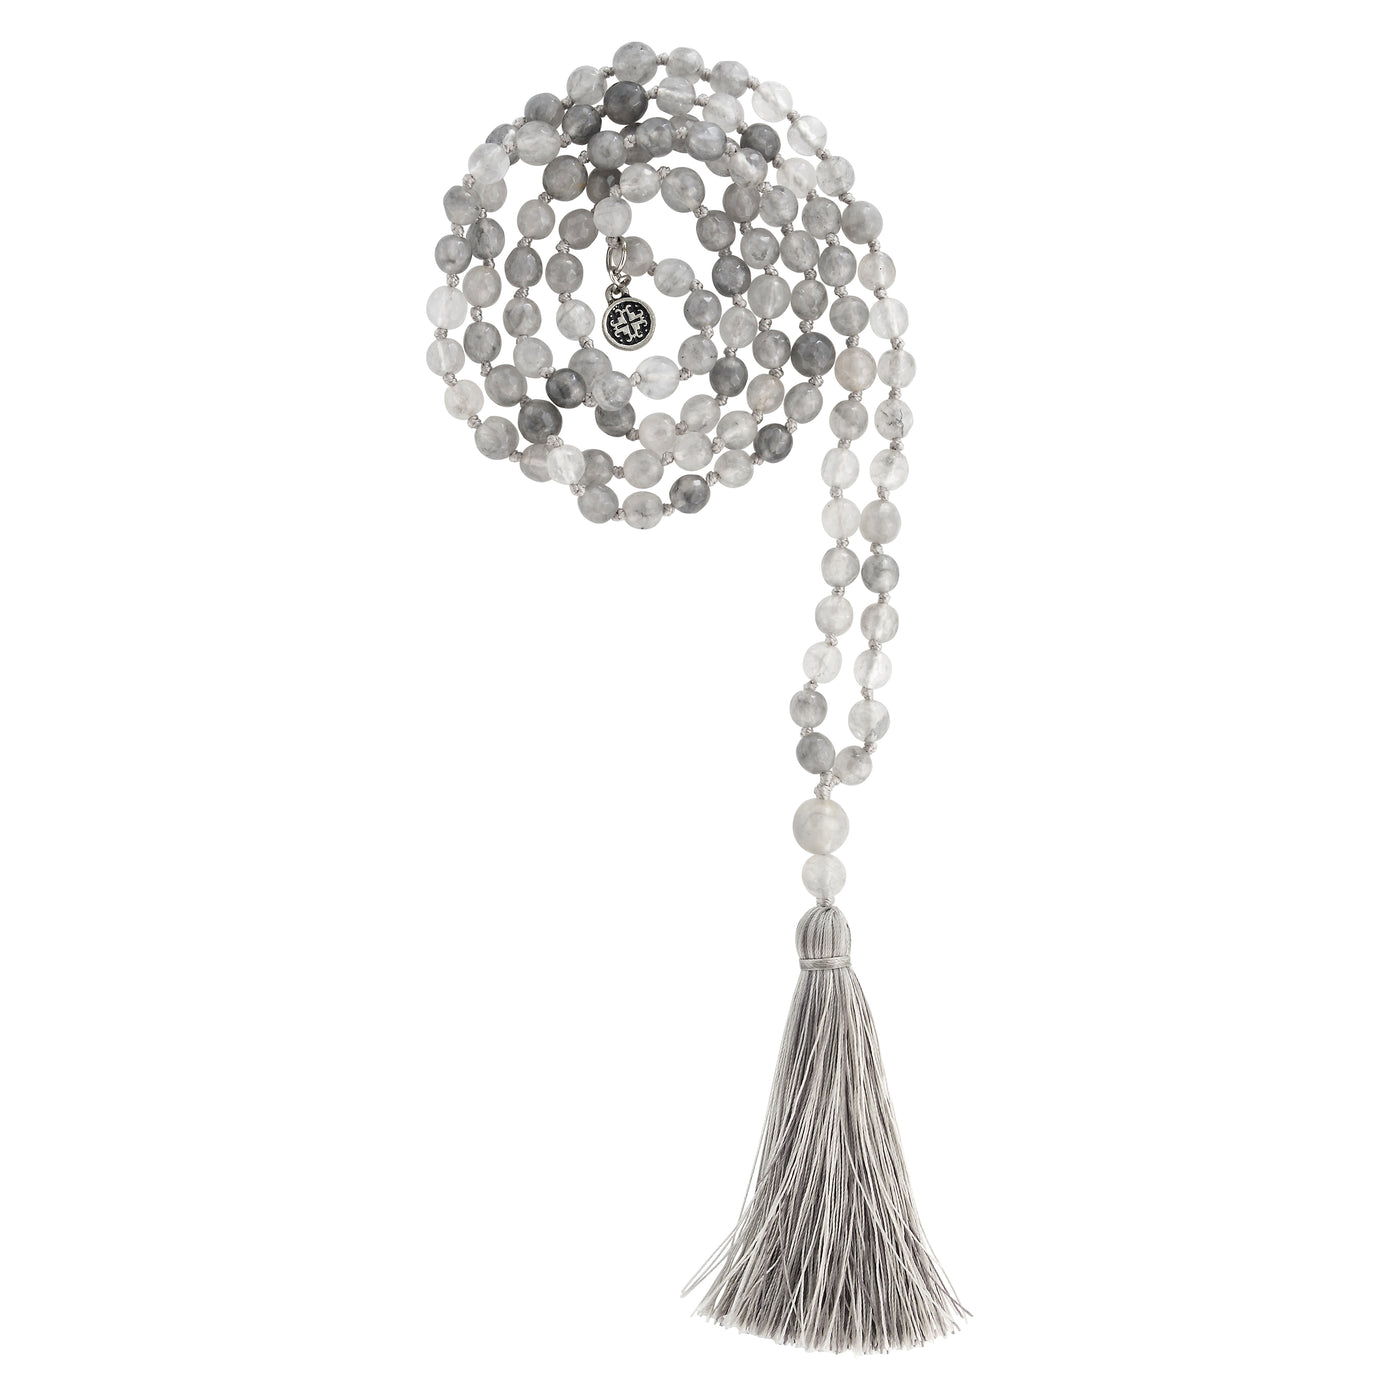 AWARENESS: Silver Grey Quartz Faceted 108 bead Hand-knotted Mala